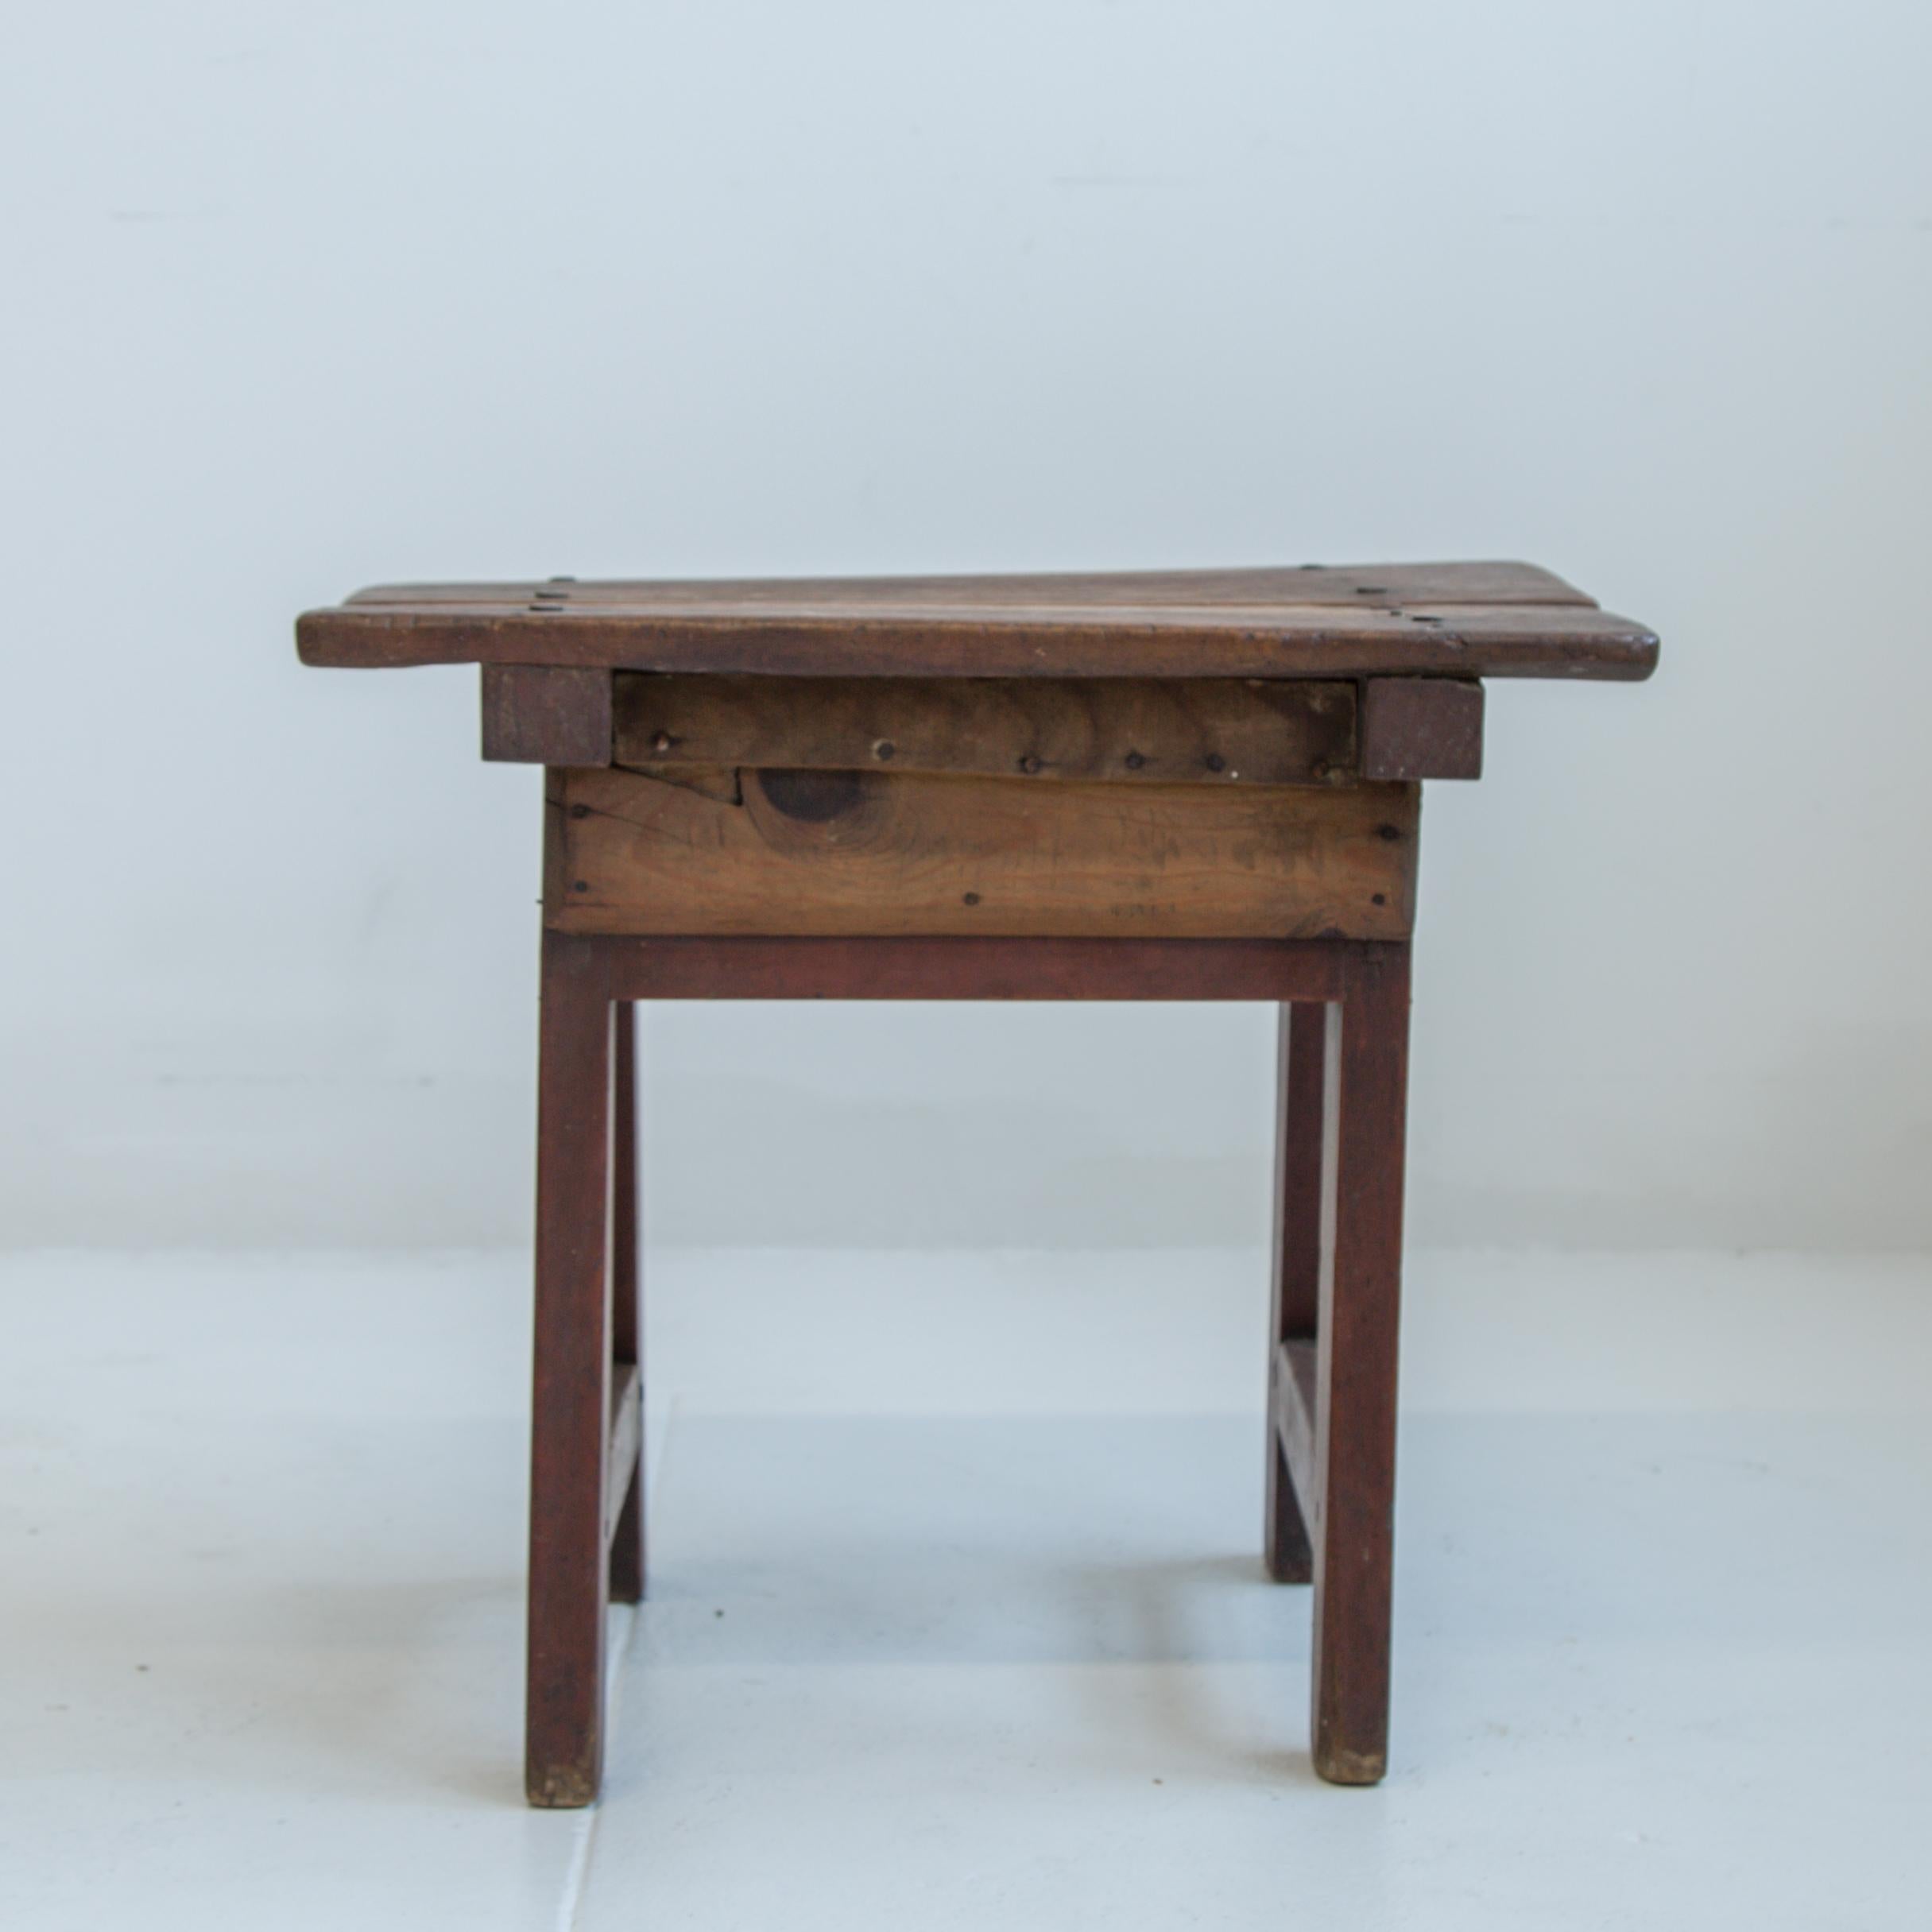 Southern yellow pine side or work table from South Carolina, United States. Early to mid 1800s. Single drawer with carved pull. Great as a side or accent table to bring in natural wood elements. Table measures 16.13